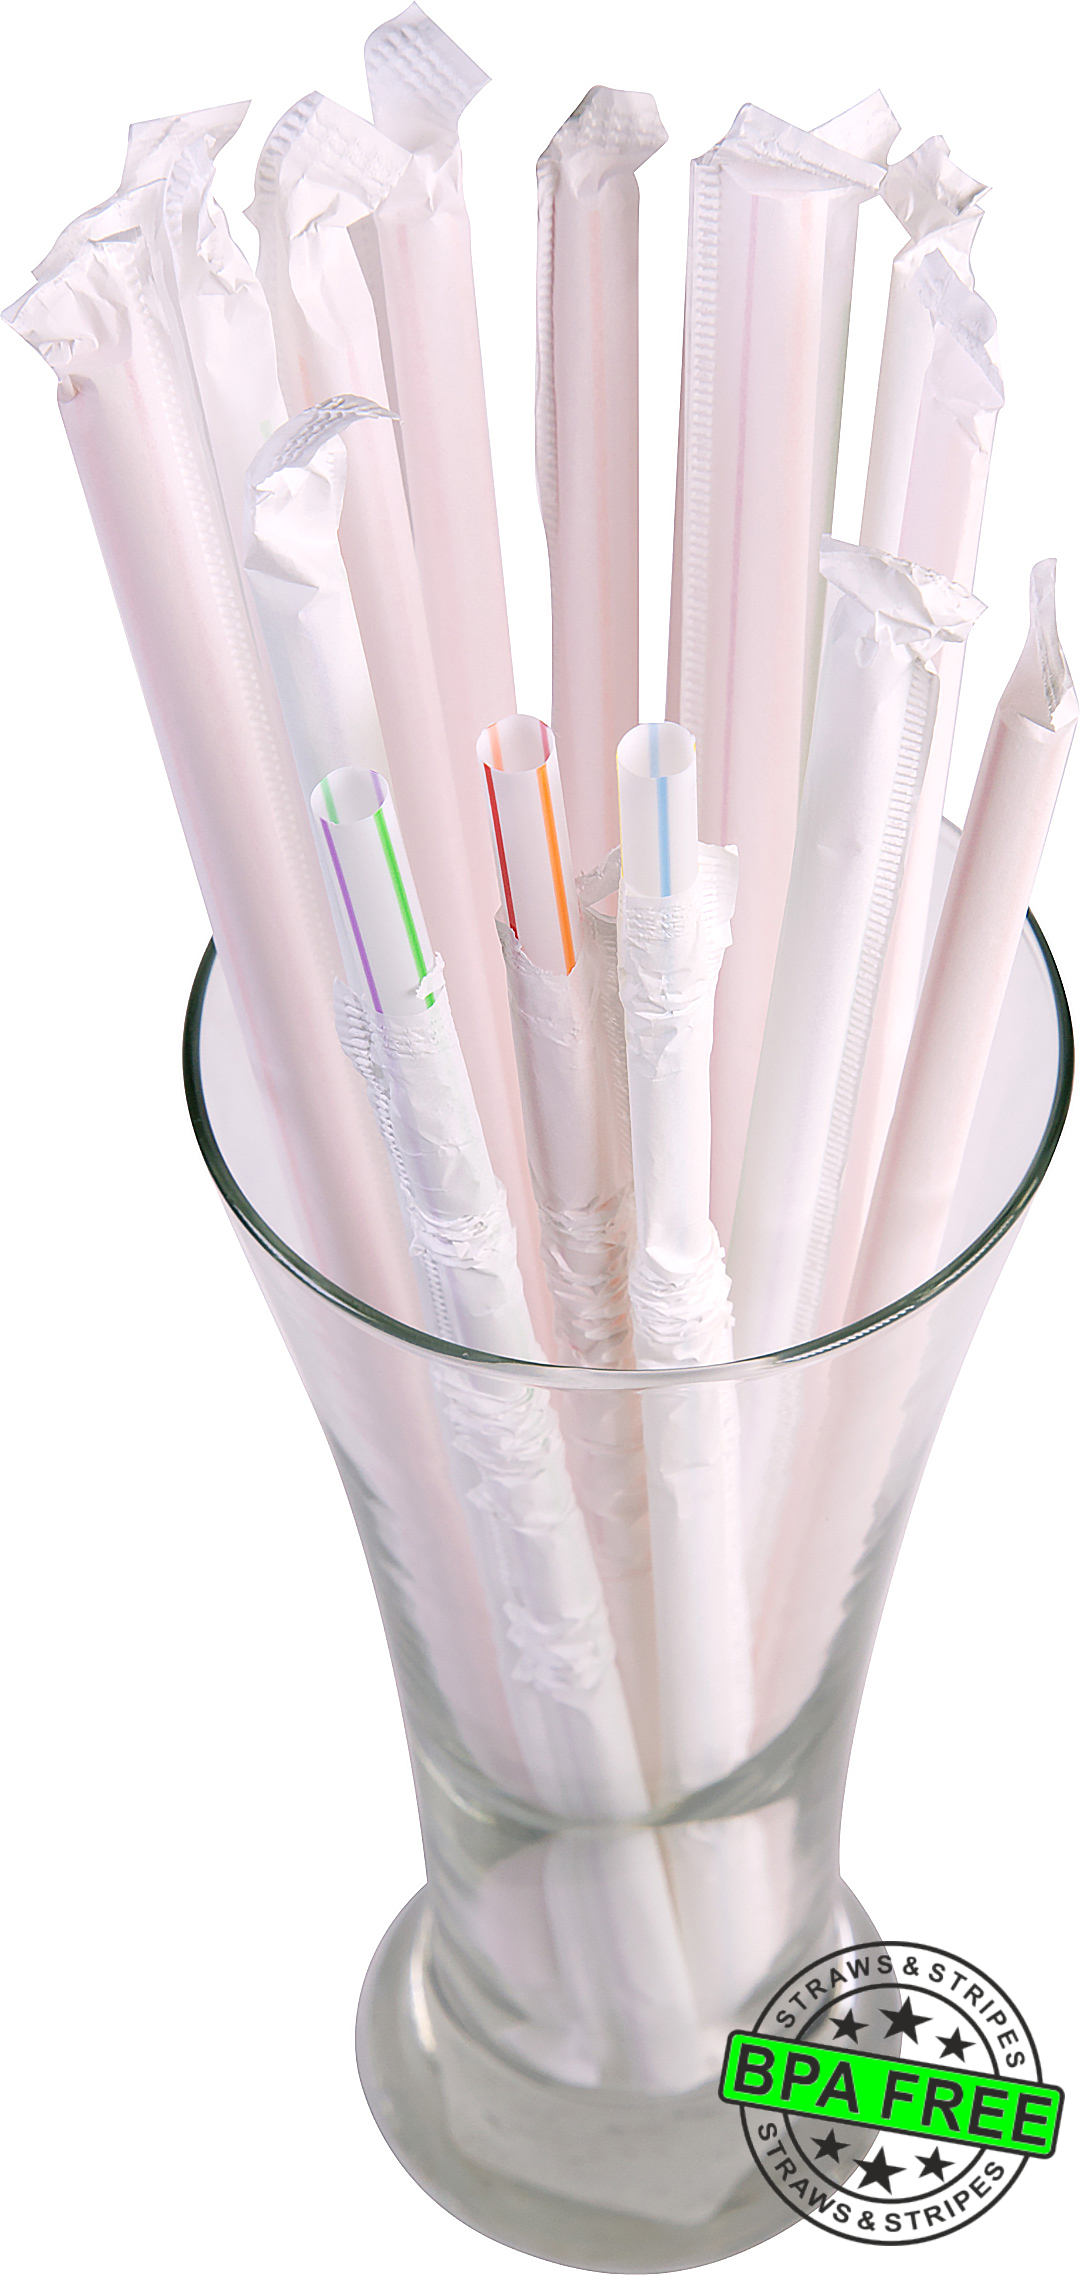 1 CASE - 2,500 (10x250) PAPER WRAPPED SMOOTHIE drinking straws 10 x 0.28 inch - color: w/mc str.*